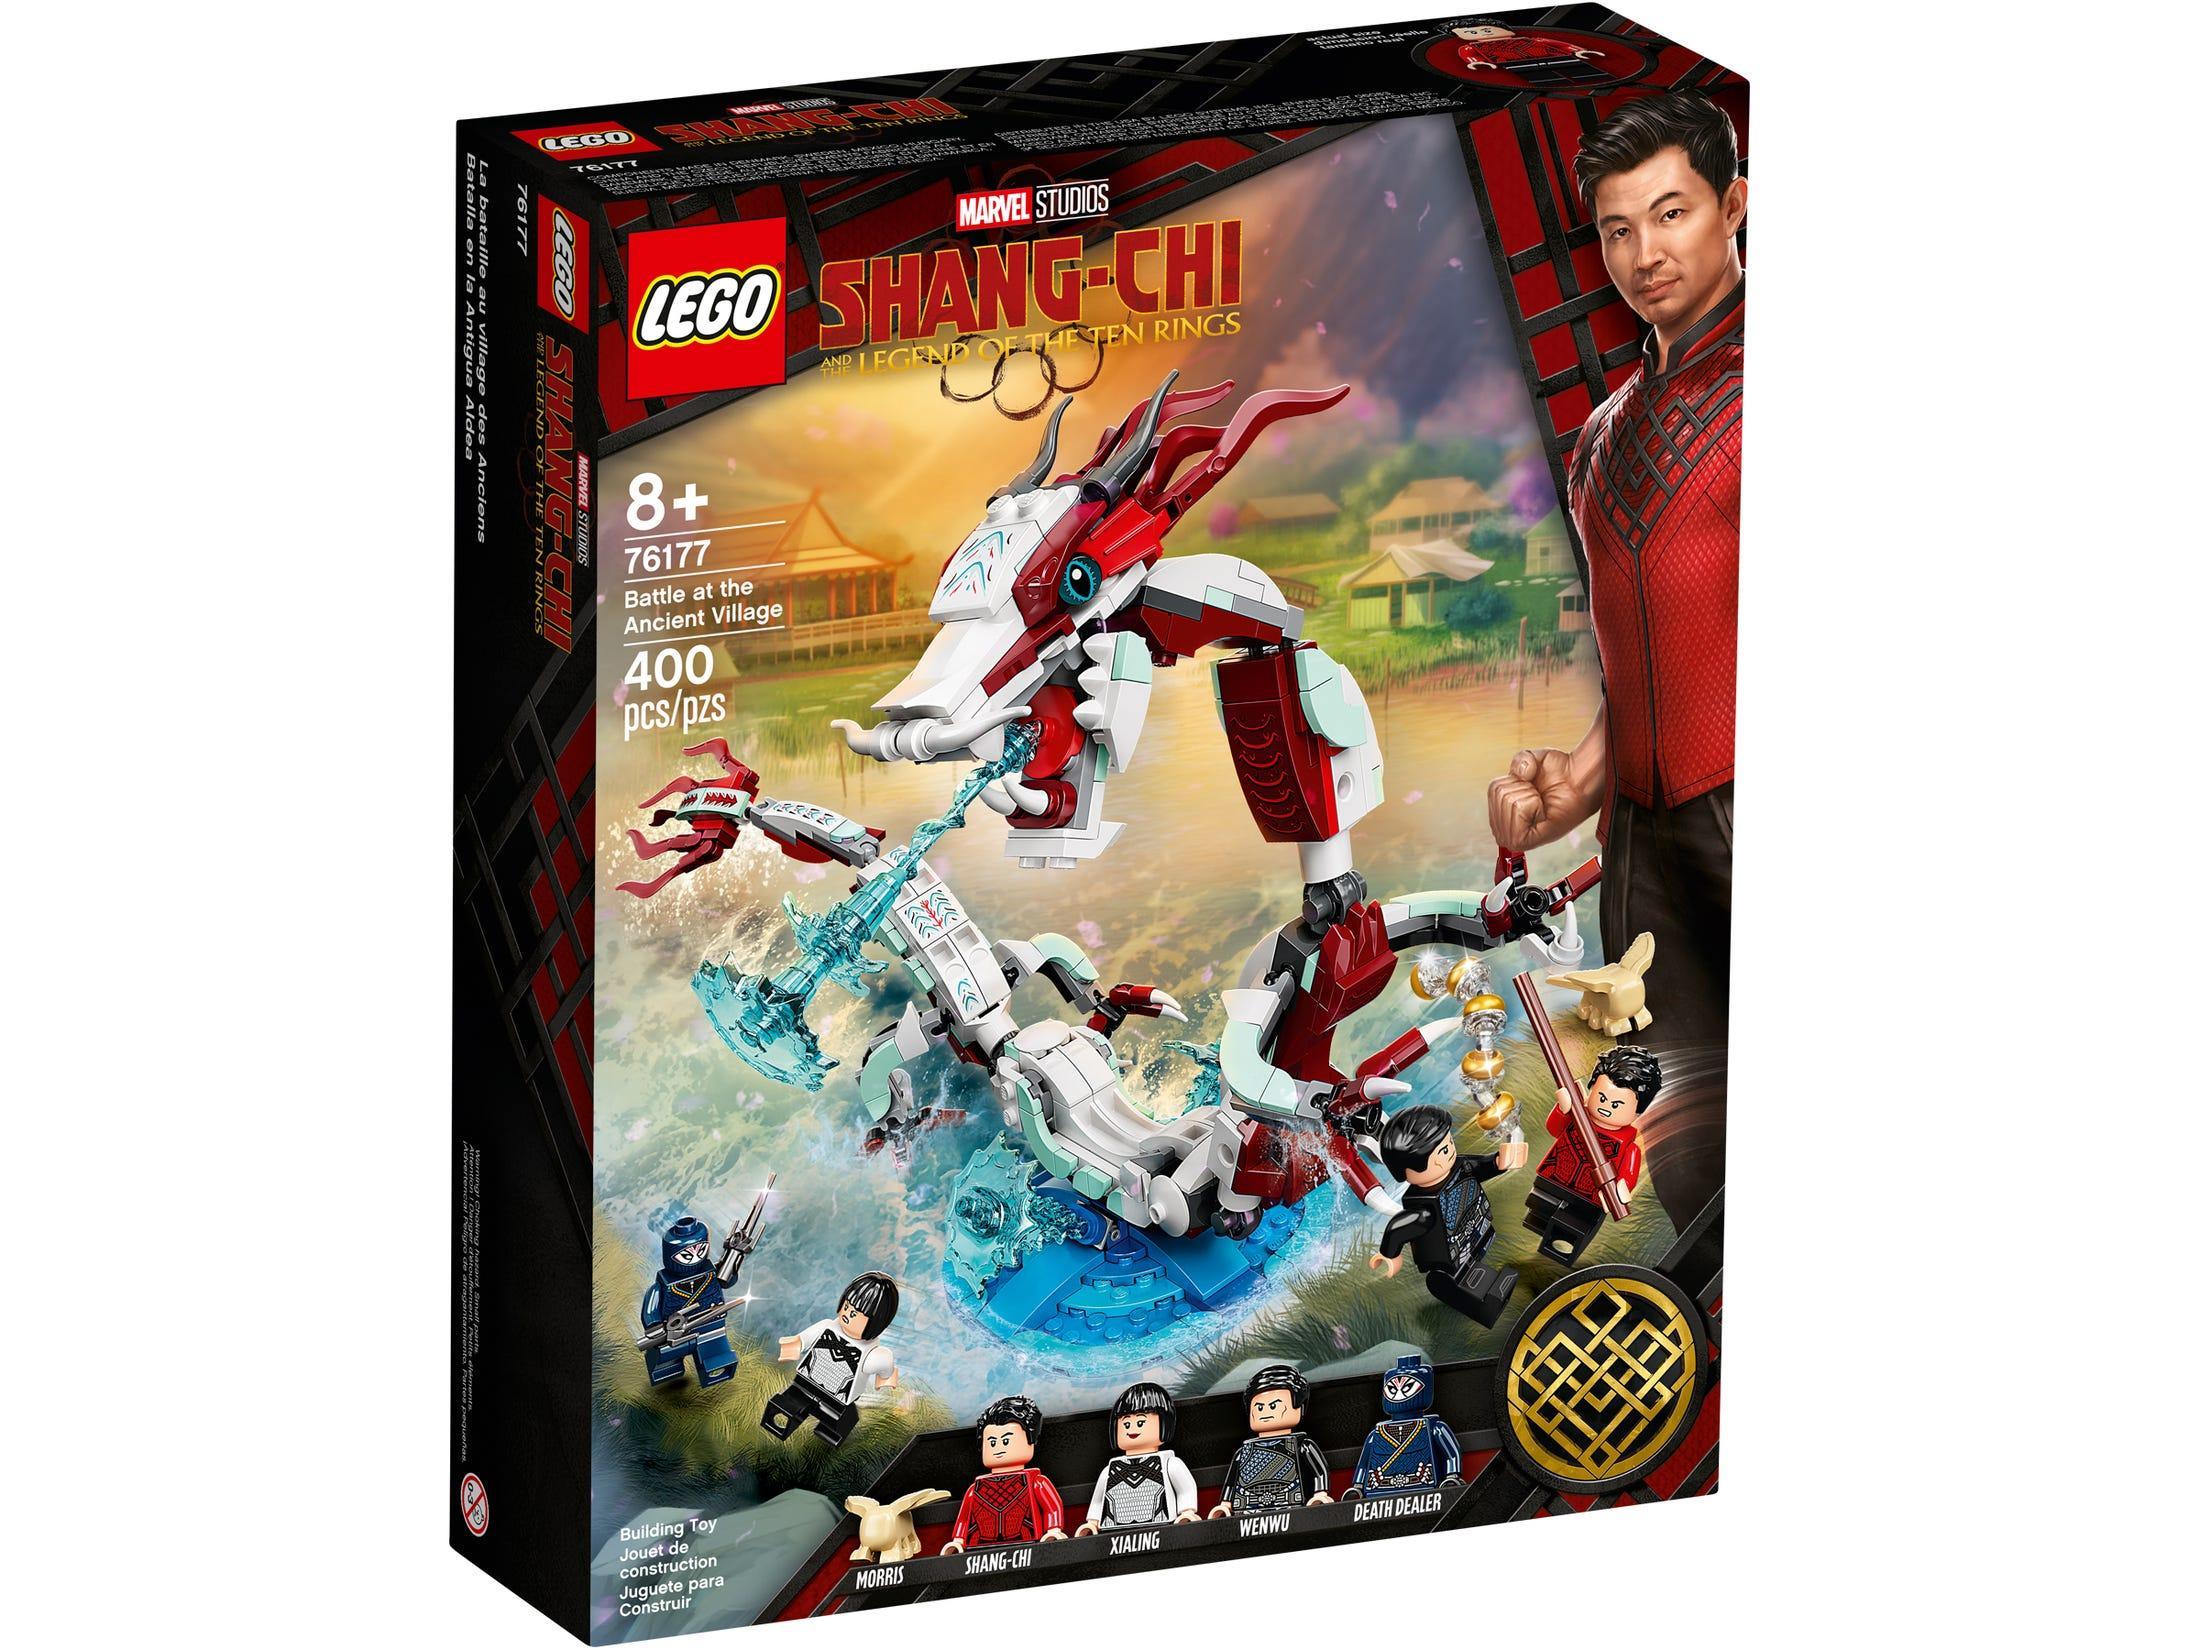 LEGO 76177 Battle At The Ancient Village - Shang Chi Marvel Super Heroes